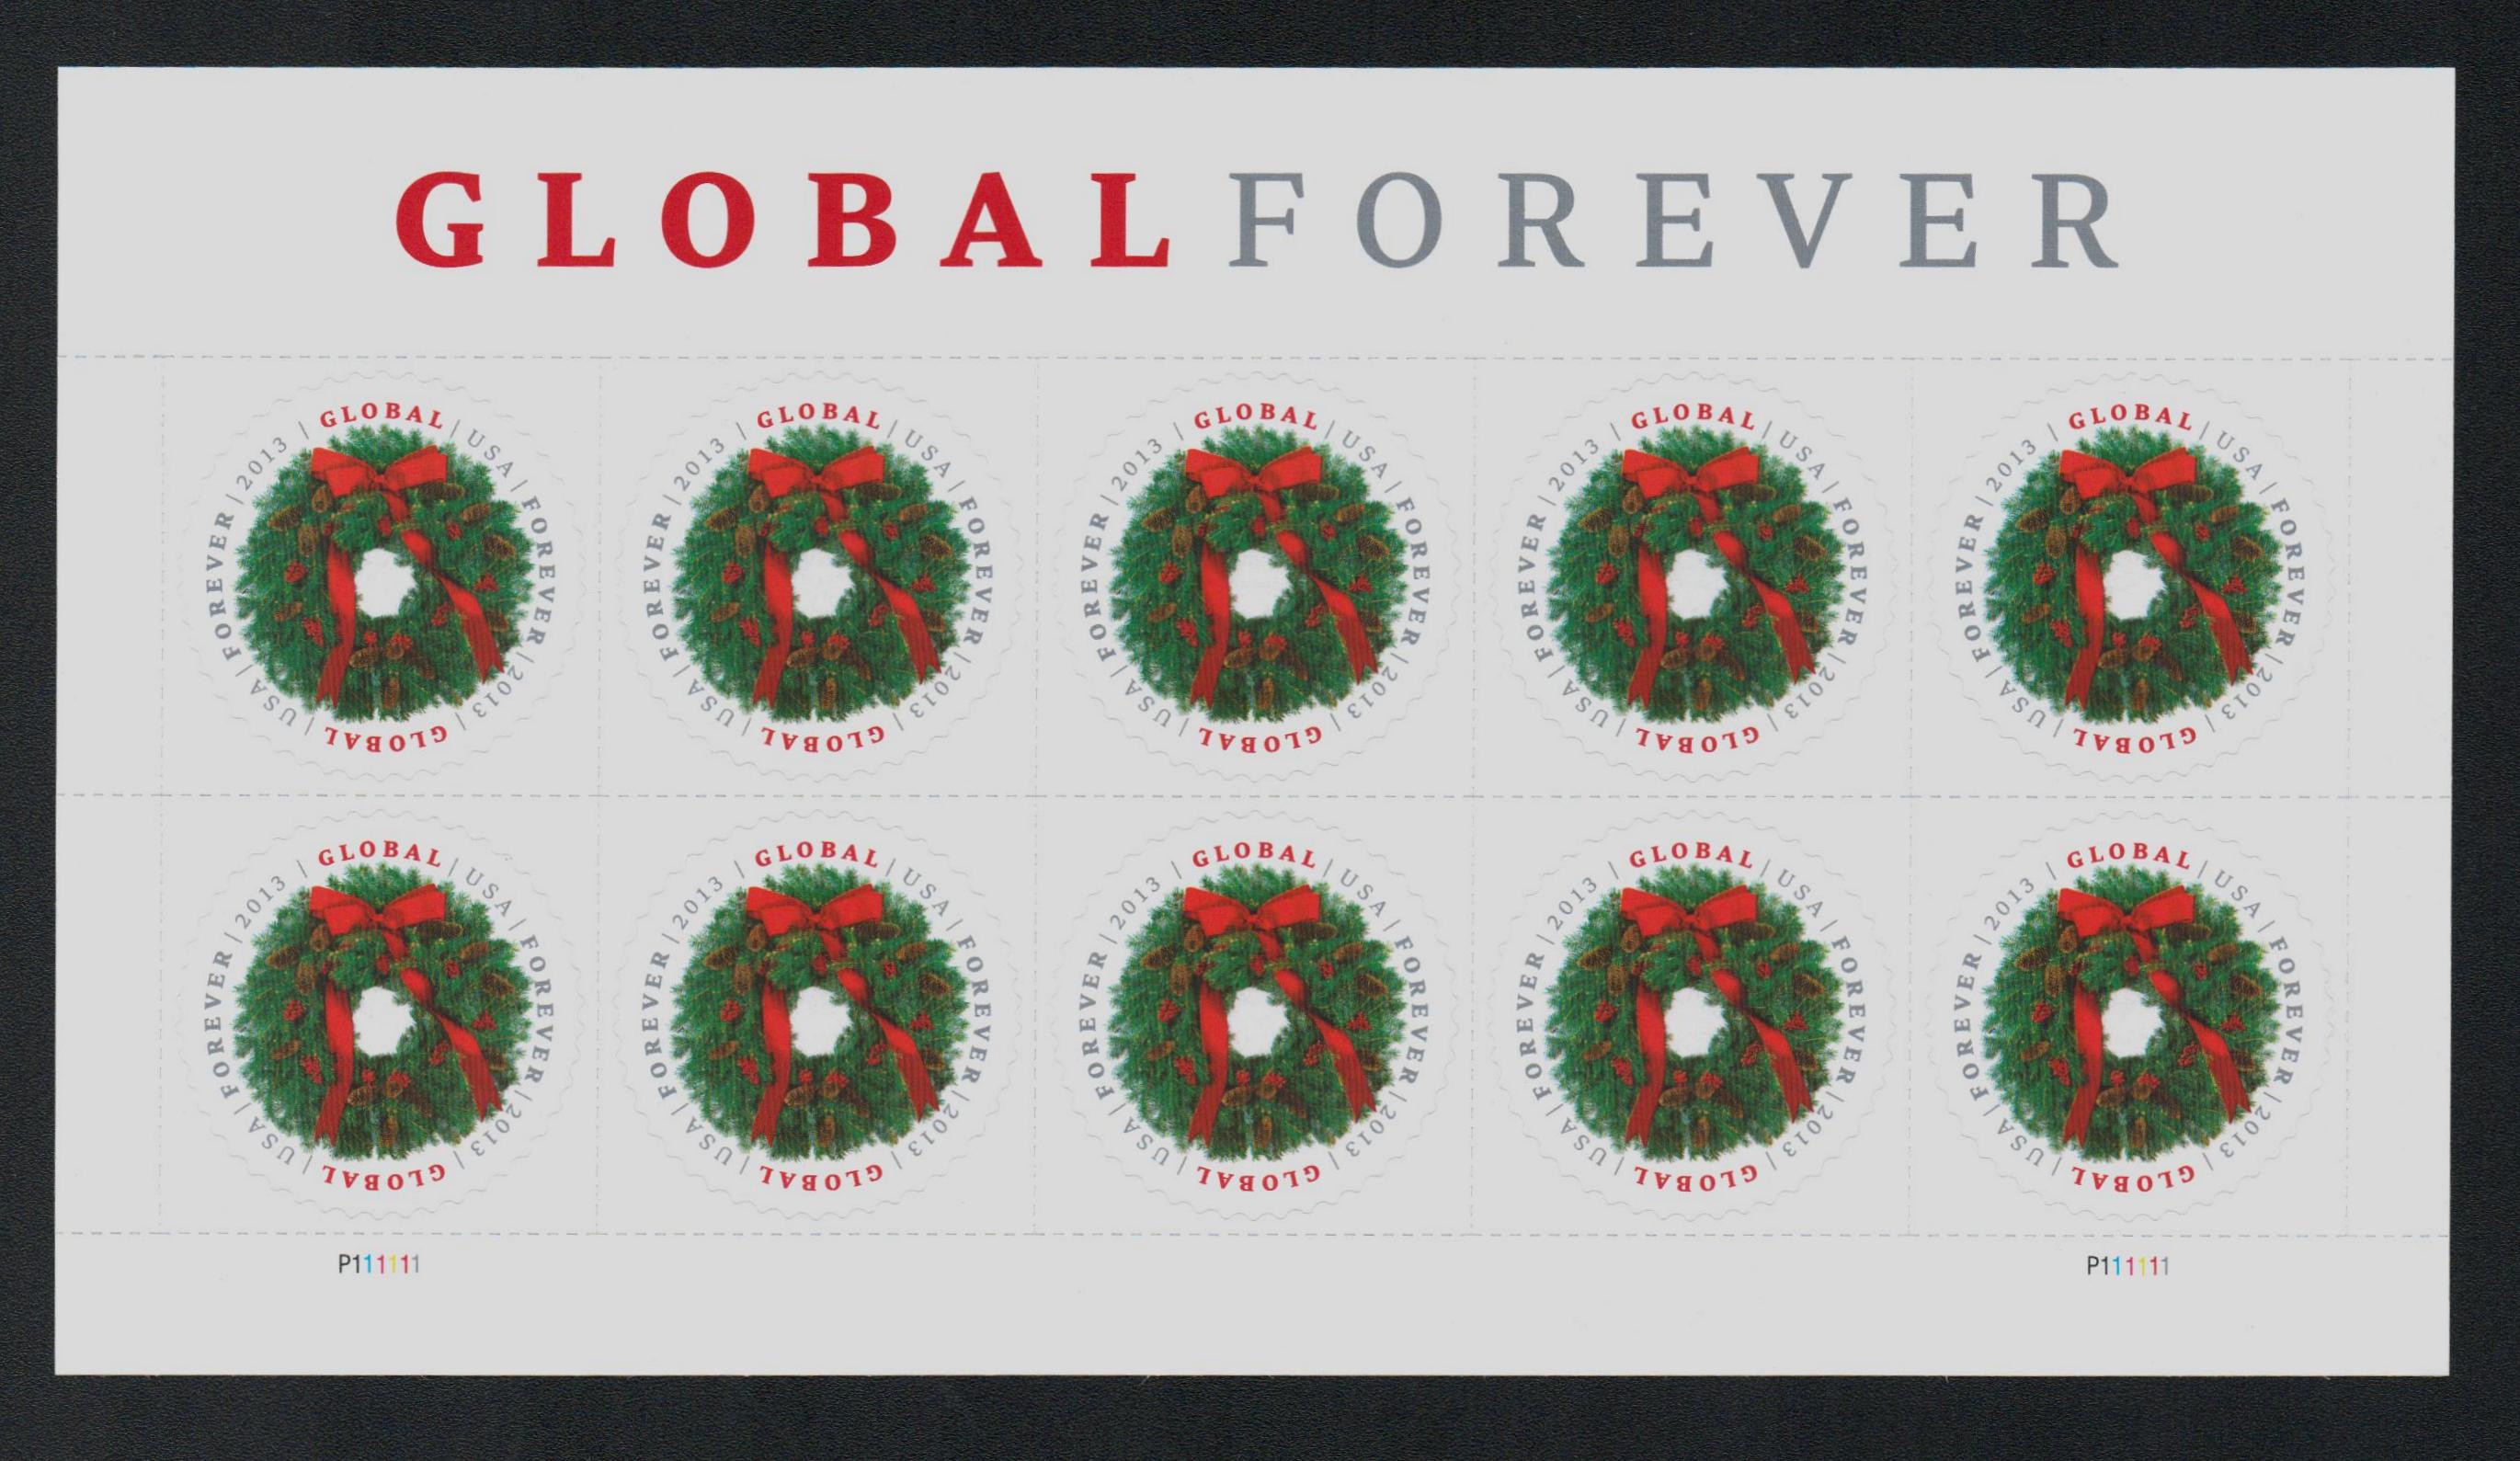 4936 PB - 2014 Global Forever Stamp - Silver Bells Wreath - Mystic Stamp  Company